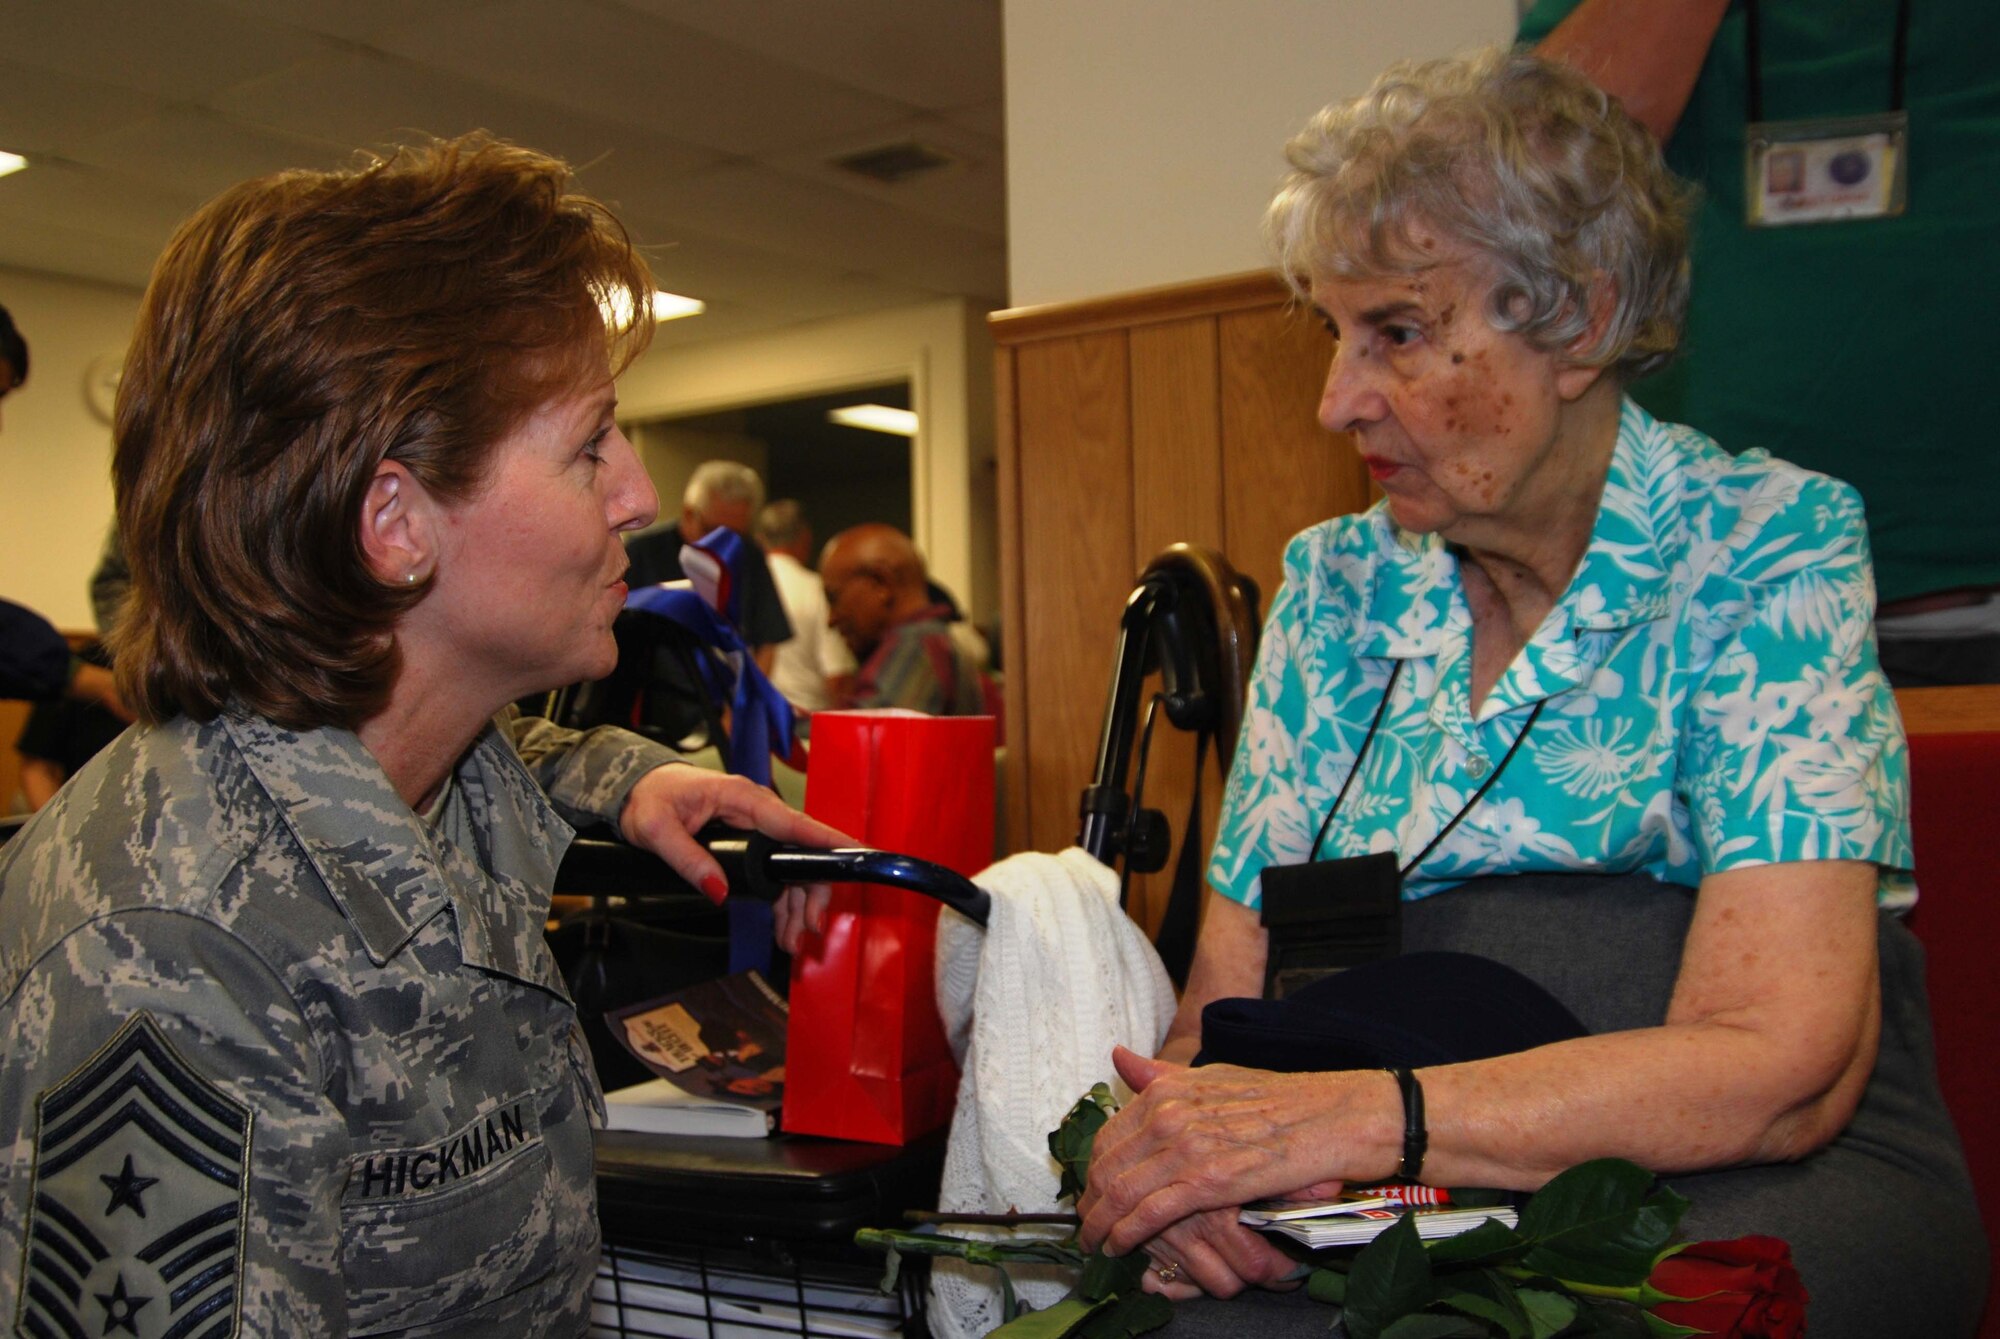 Chief Master Sgt. Patti Hickman, 459 Air Refueling Wing command chief discusses past military assignments with a resident of the Armed Forces Retirement Home during a wing-wide visit in honor of Veterans Day.  Coordinated by the Chaplin's office, members of the 459th ARW visit the Armed Forces Retirement home twice a year to share stories and spend time with residents. (U.S. Air Force Photo/Senior Airman Sasha S. Skrine